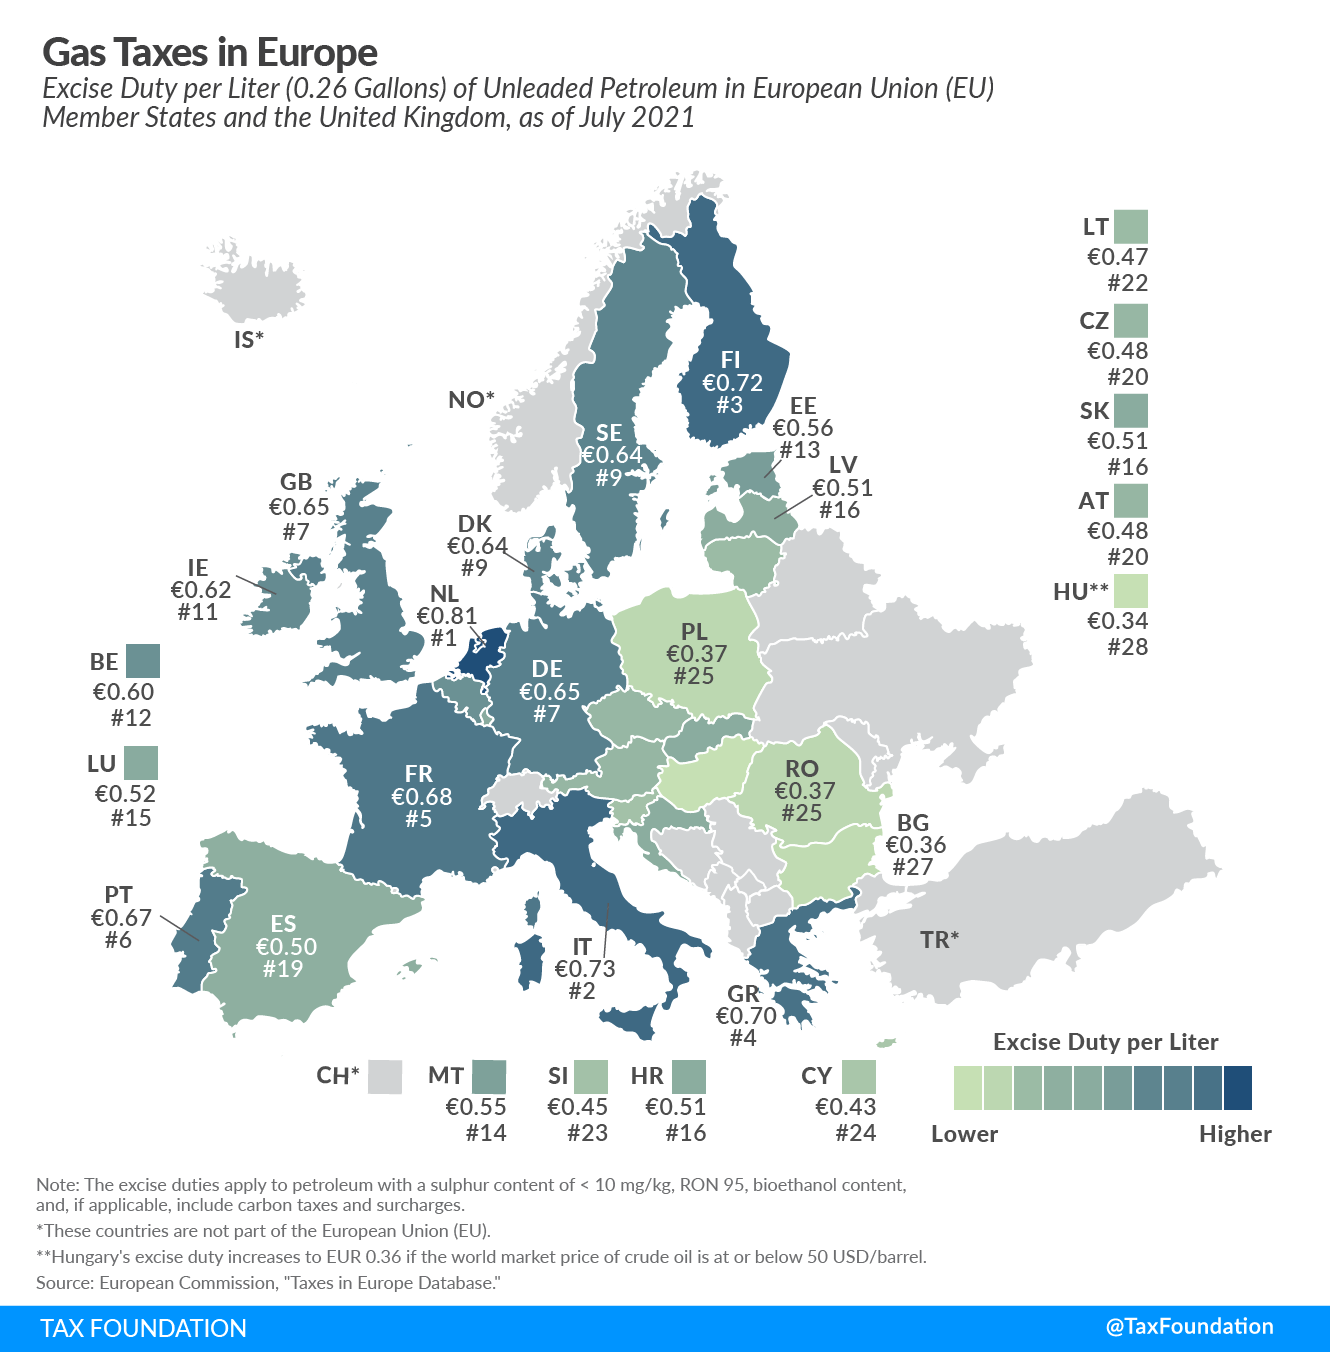 Gas Taxes in Europe, 2021